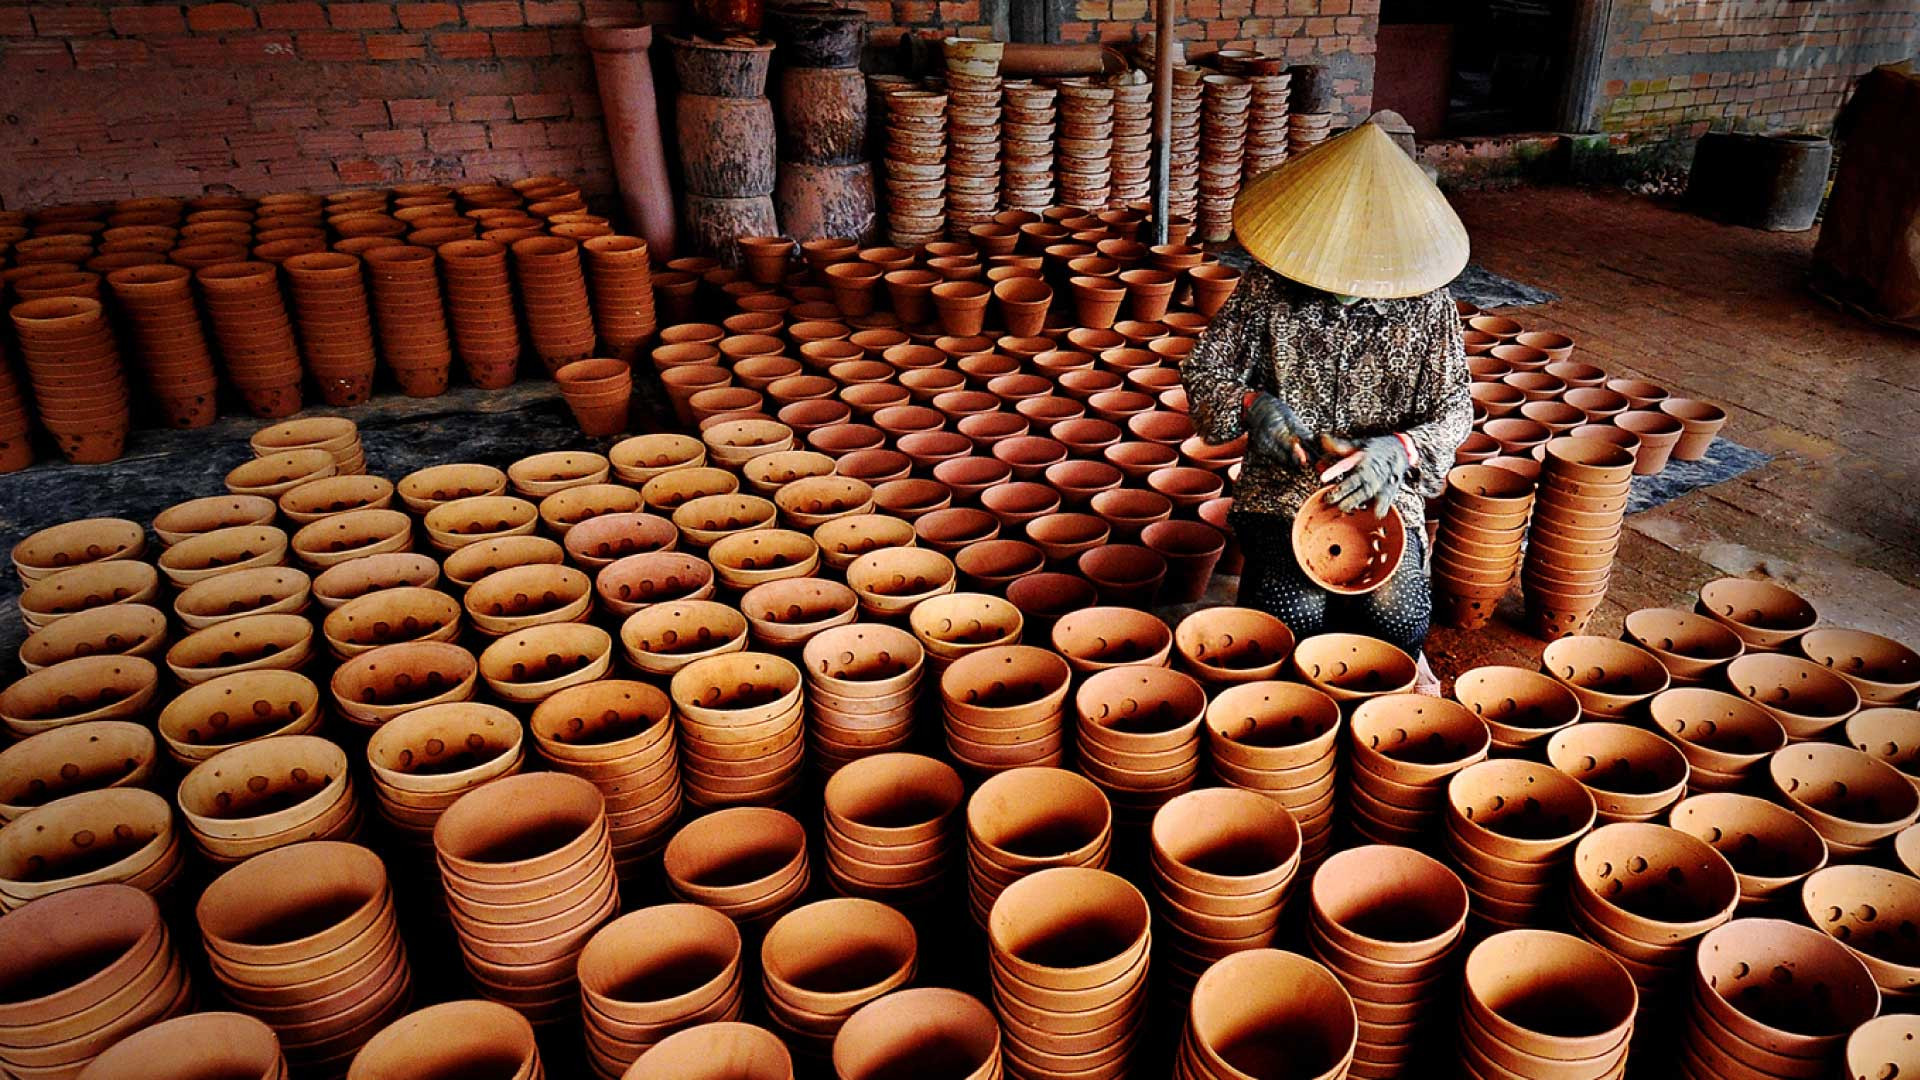 Why pottery is a popular craft in Vietnam